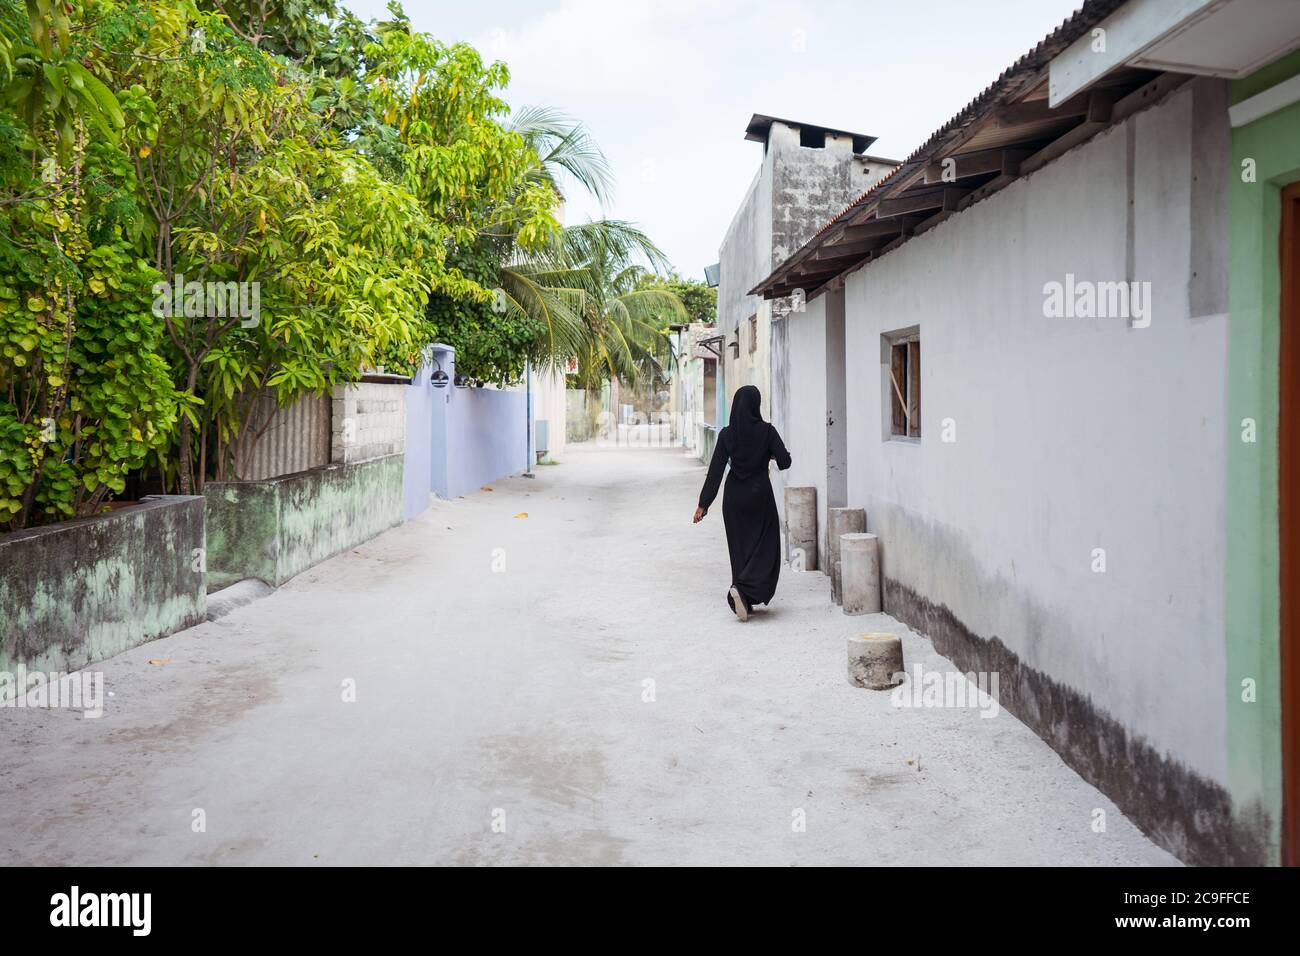 Unrecognizable Young Muslim woman in sand street in Bodufolhudhoo island village, Maldives Stock Photo